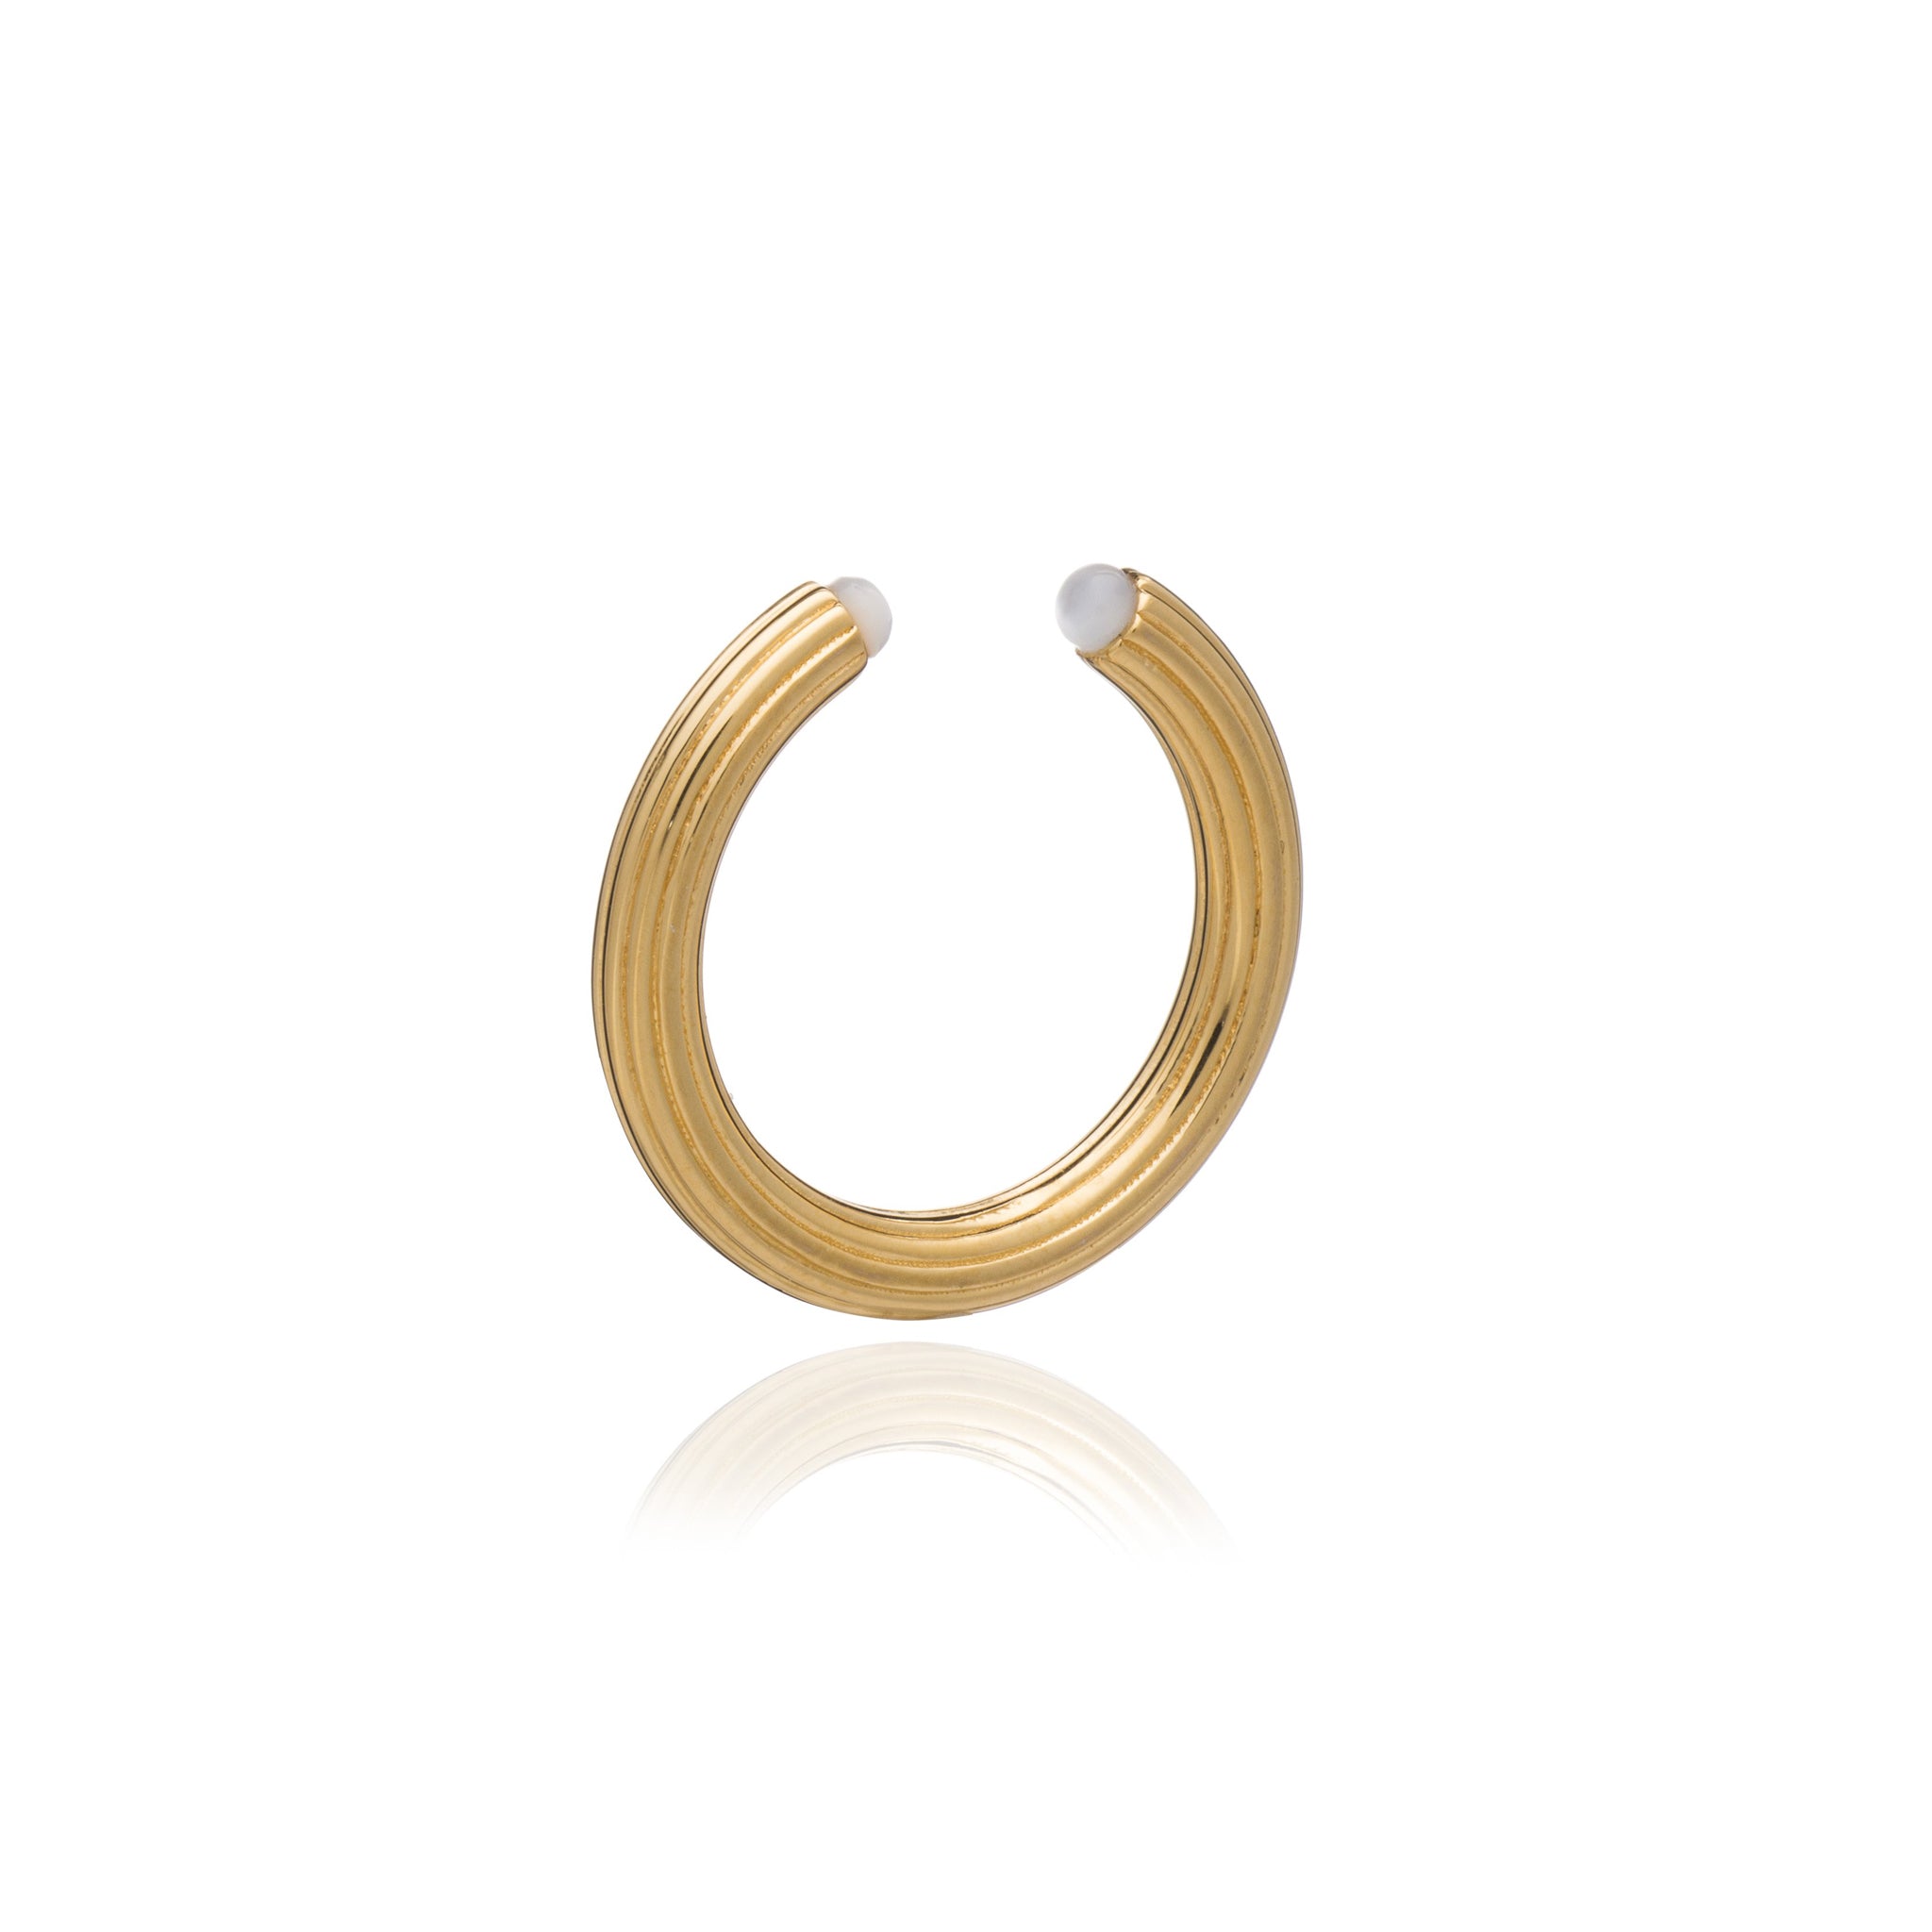 An Open Ridged Mother of Pearl Ring - Gold adorned with Mother of Pearl stones on a white background from Rachel Jackson London.